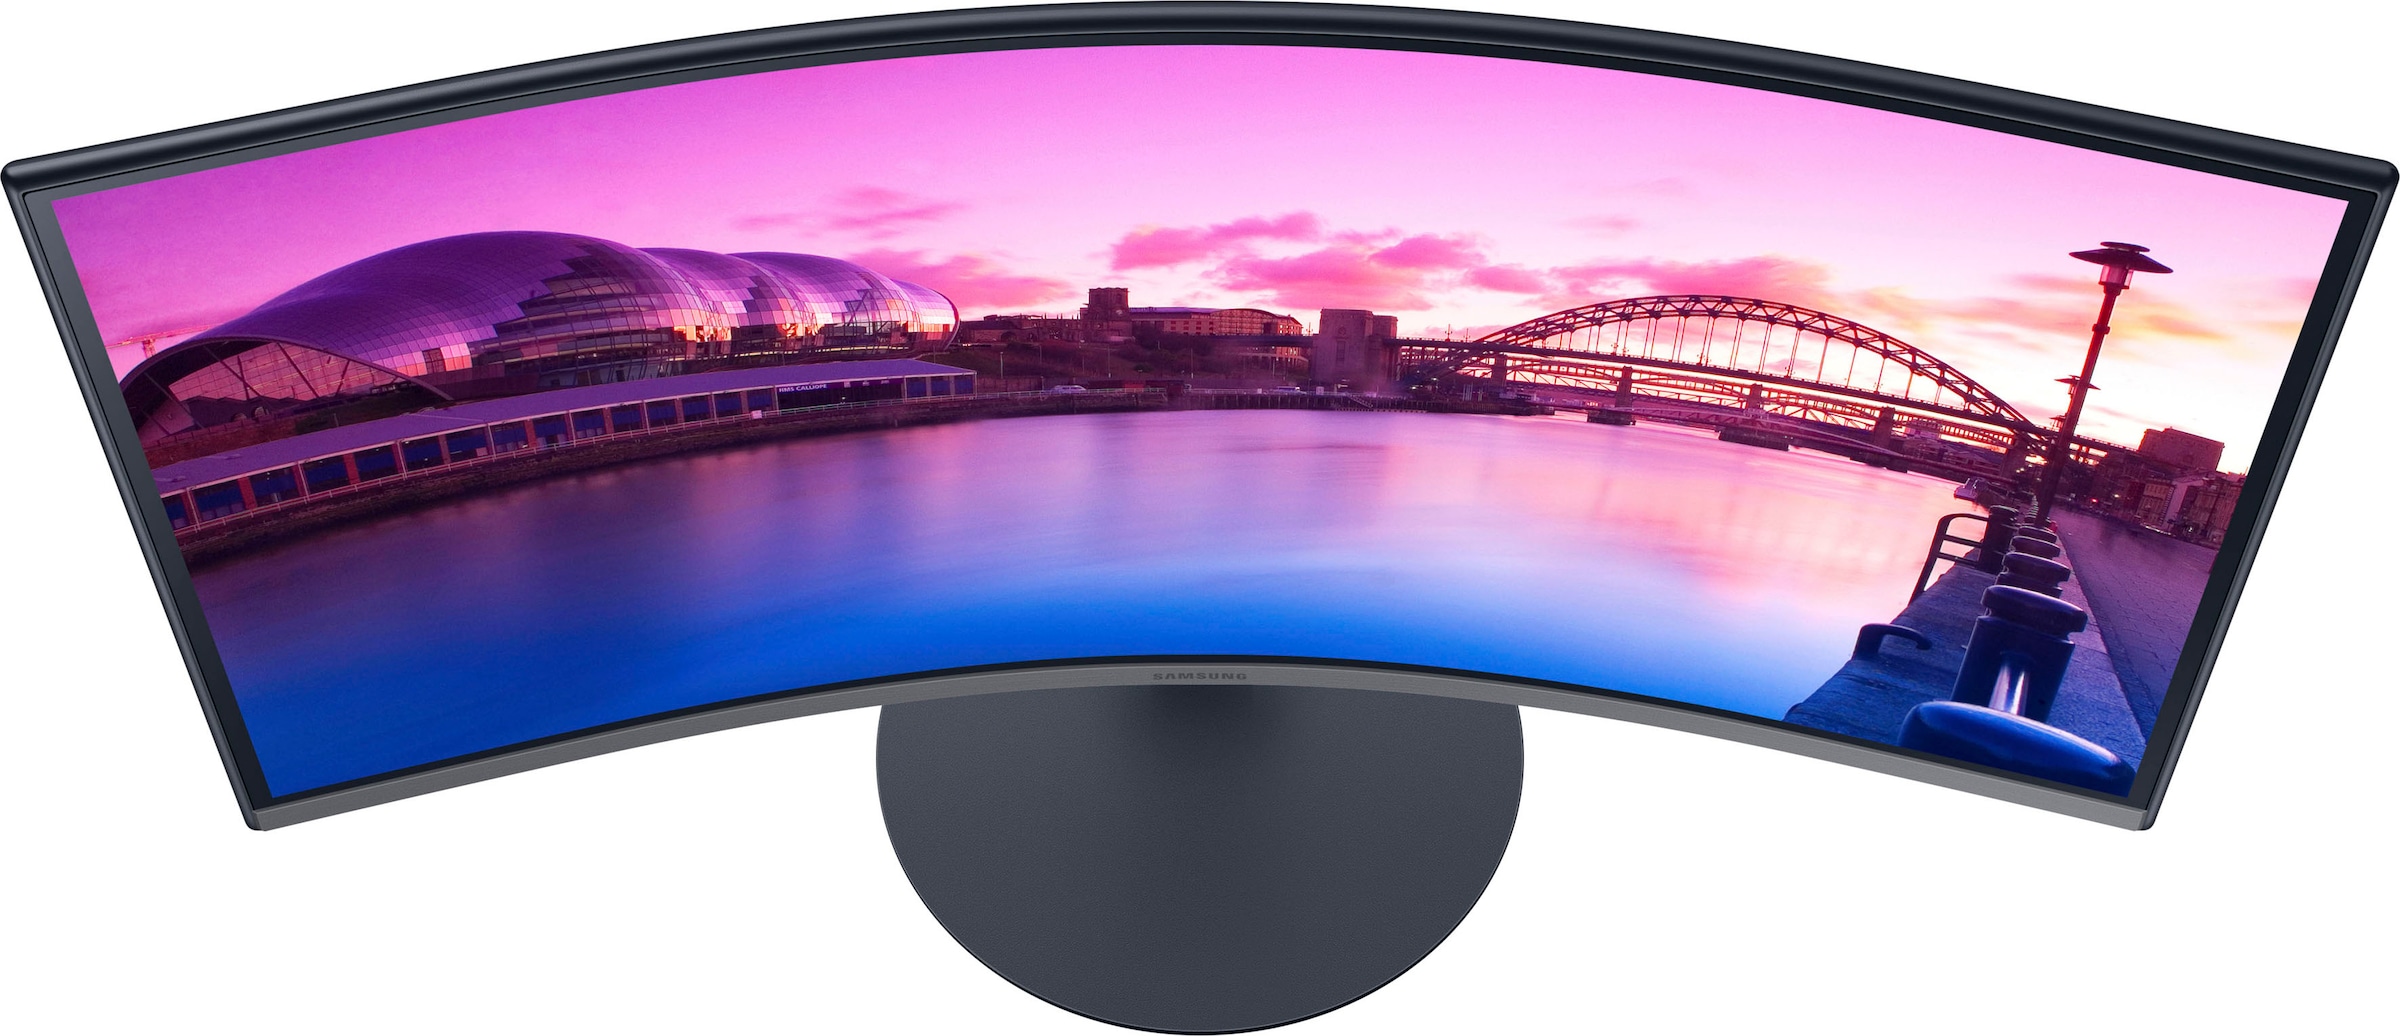 Samsung Curved-LED-Monitor »S27C390EAU«, 68,6 cm/27 Zoll, 1920 x 1080 px, Full HD, 4 ms Reaktionszeit, 75 Hz